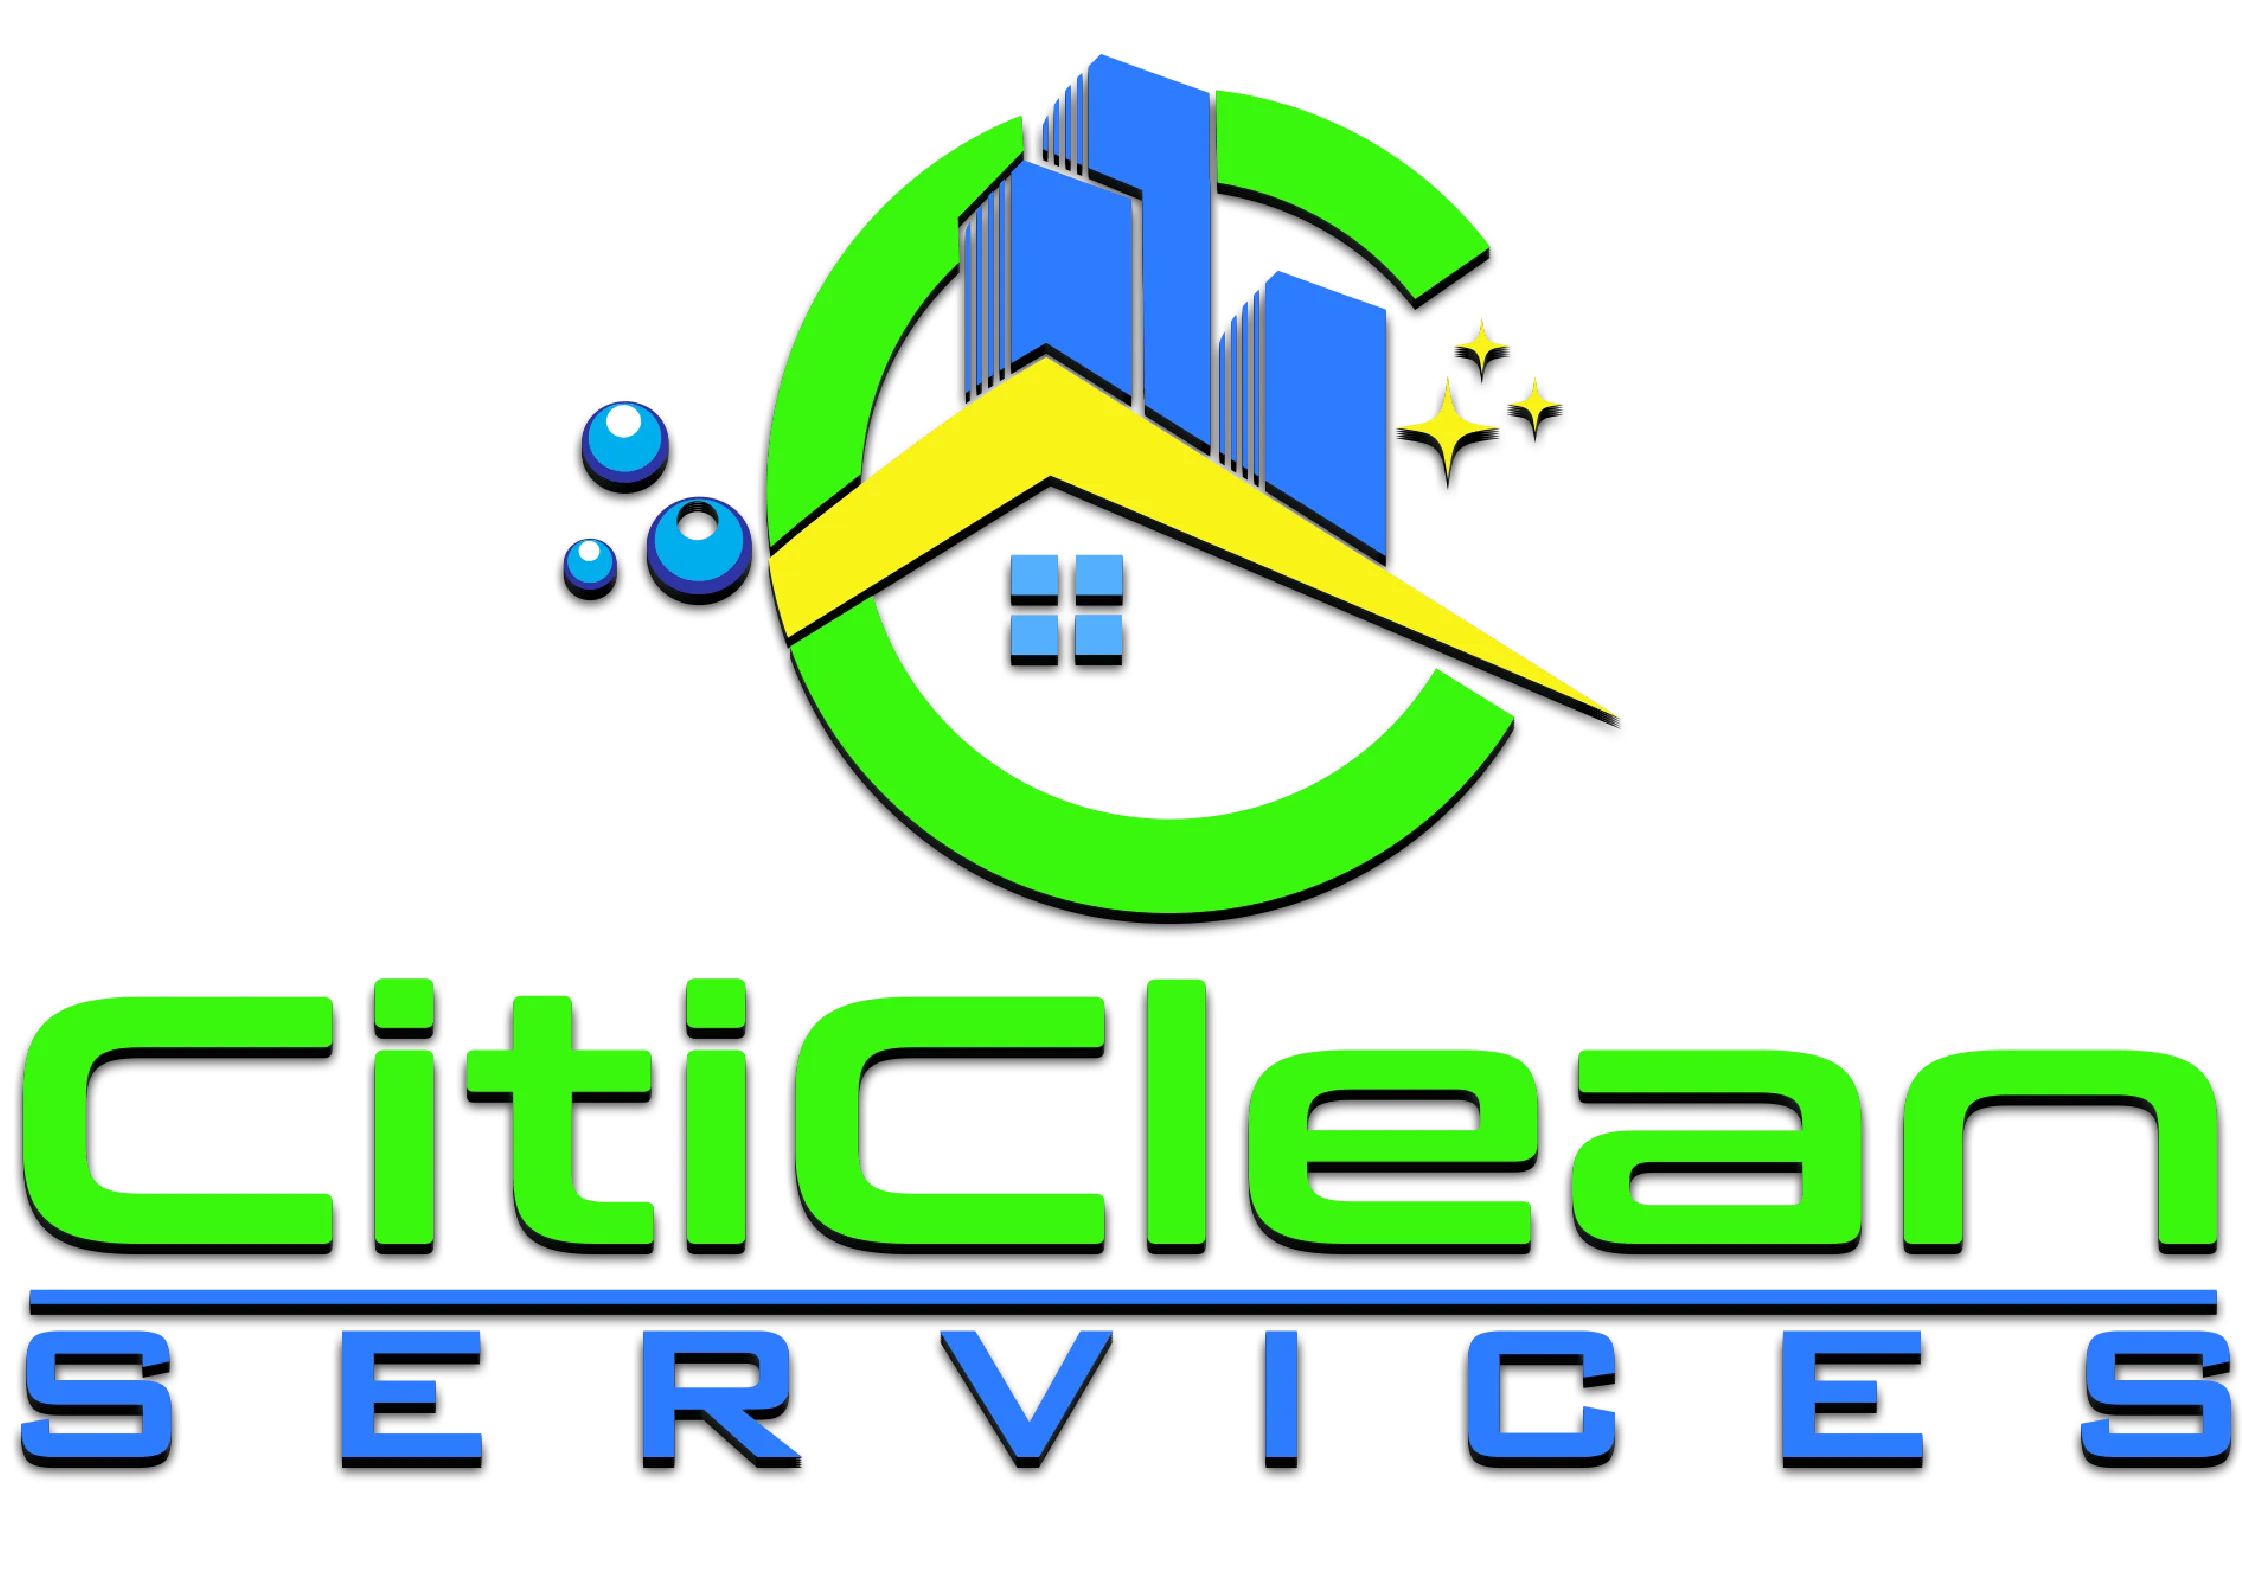 CitiClean Services